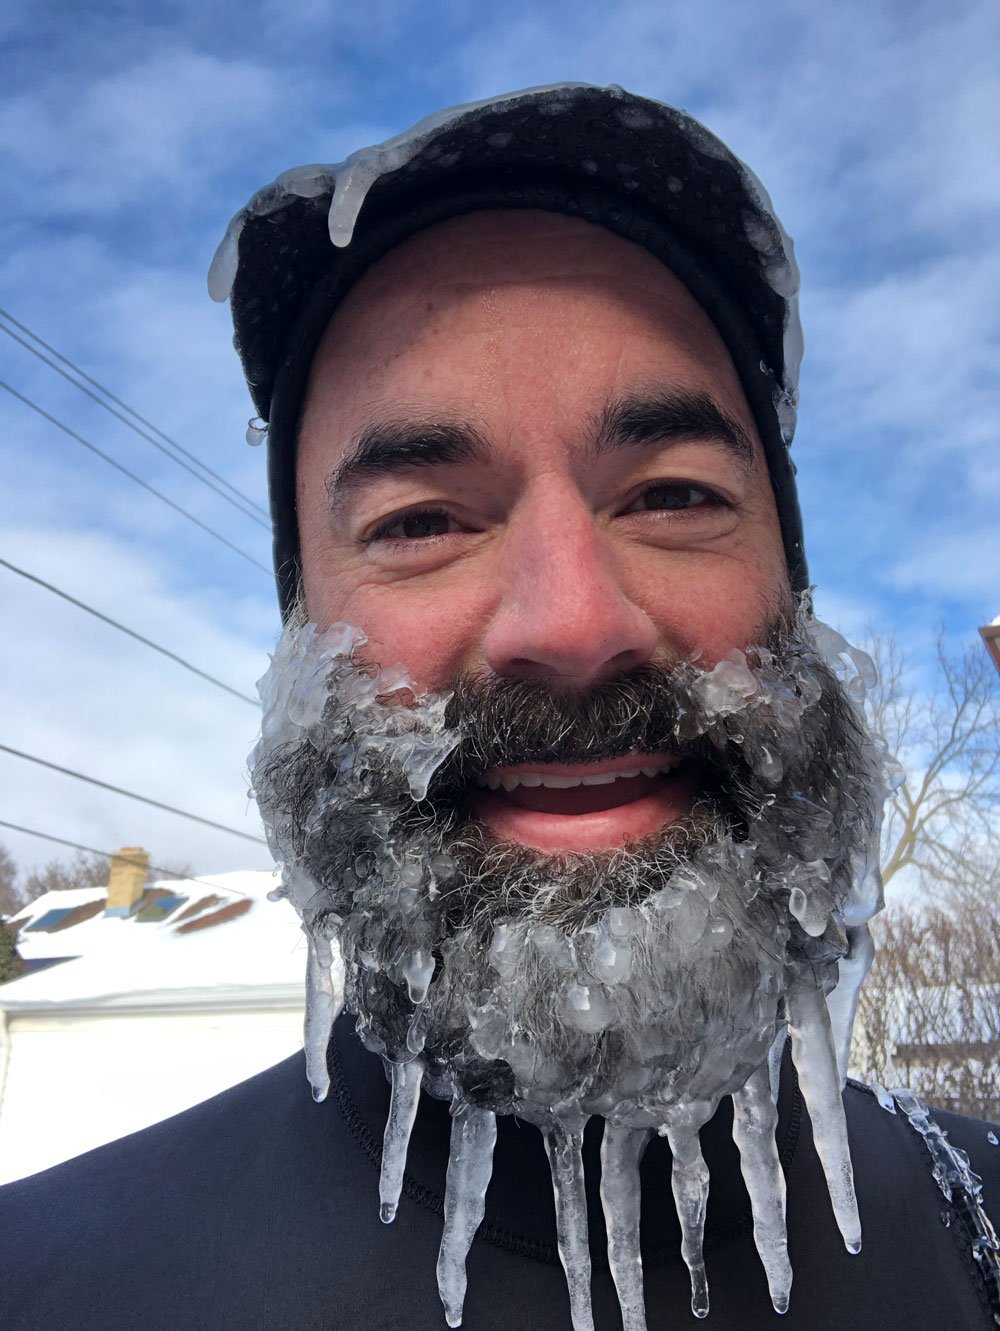 Nicholas Hade with the Milwaukee Chapter with icicles in his beard after surfing